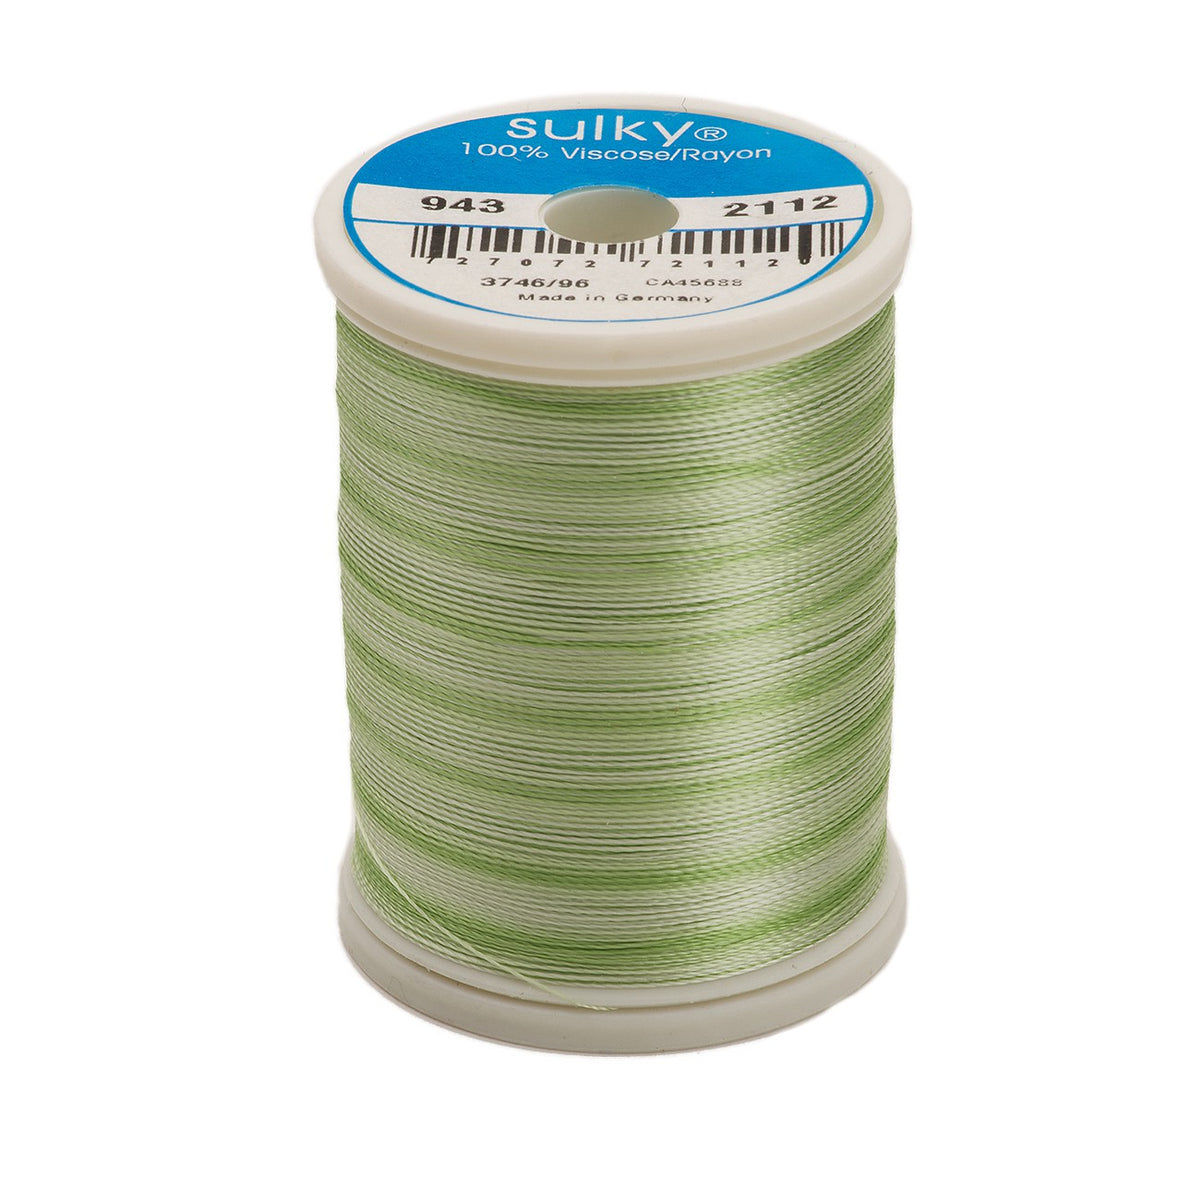 Sulky Variegated 40wt Rayon Thread 2112 Mint Green   850yd